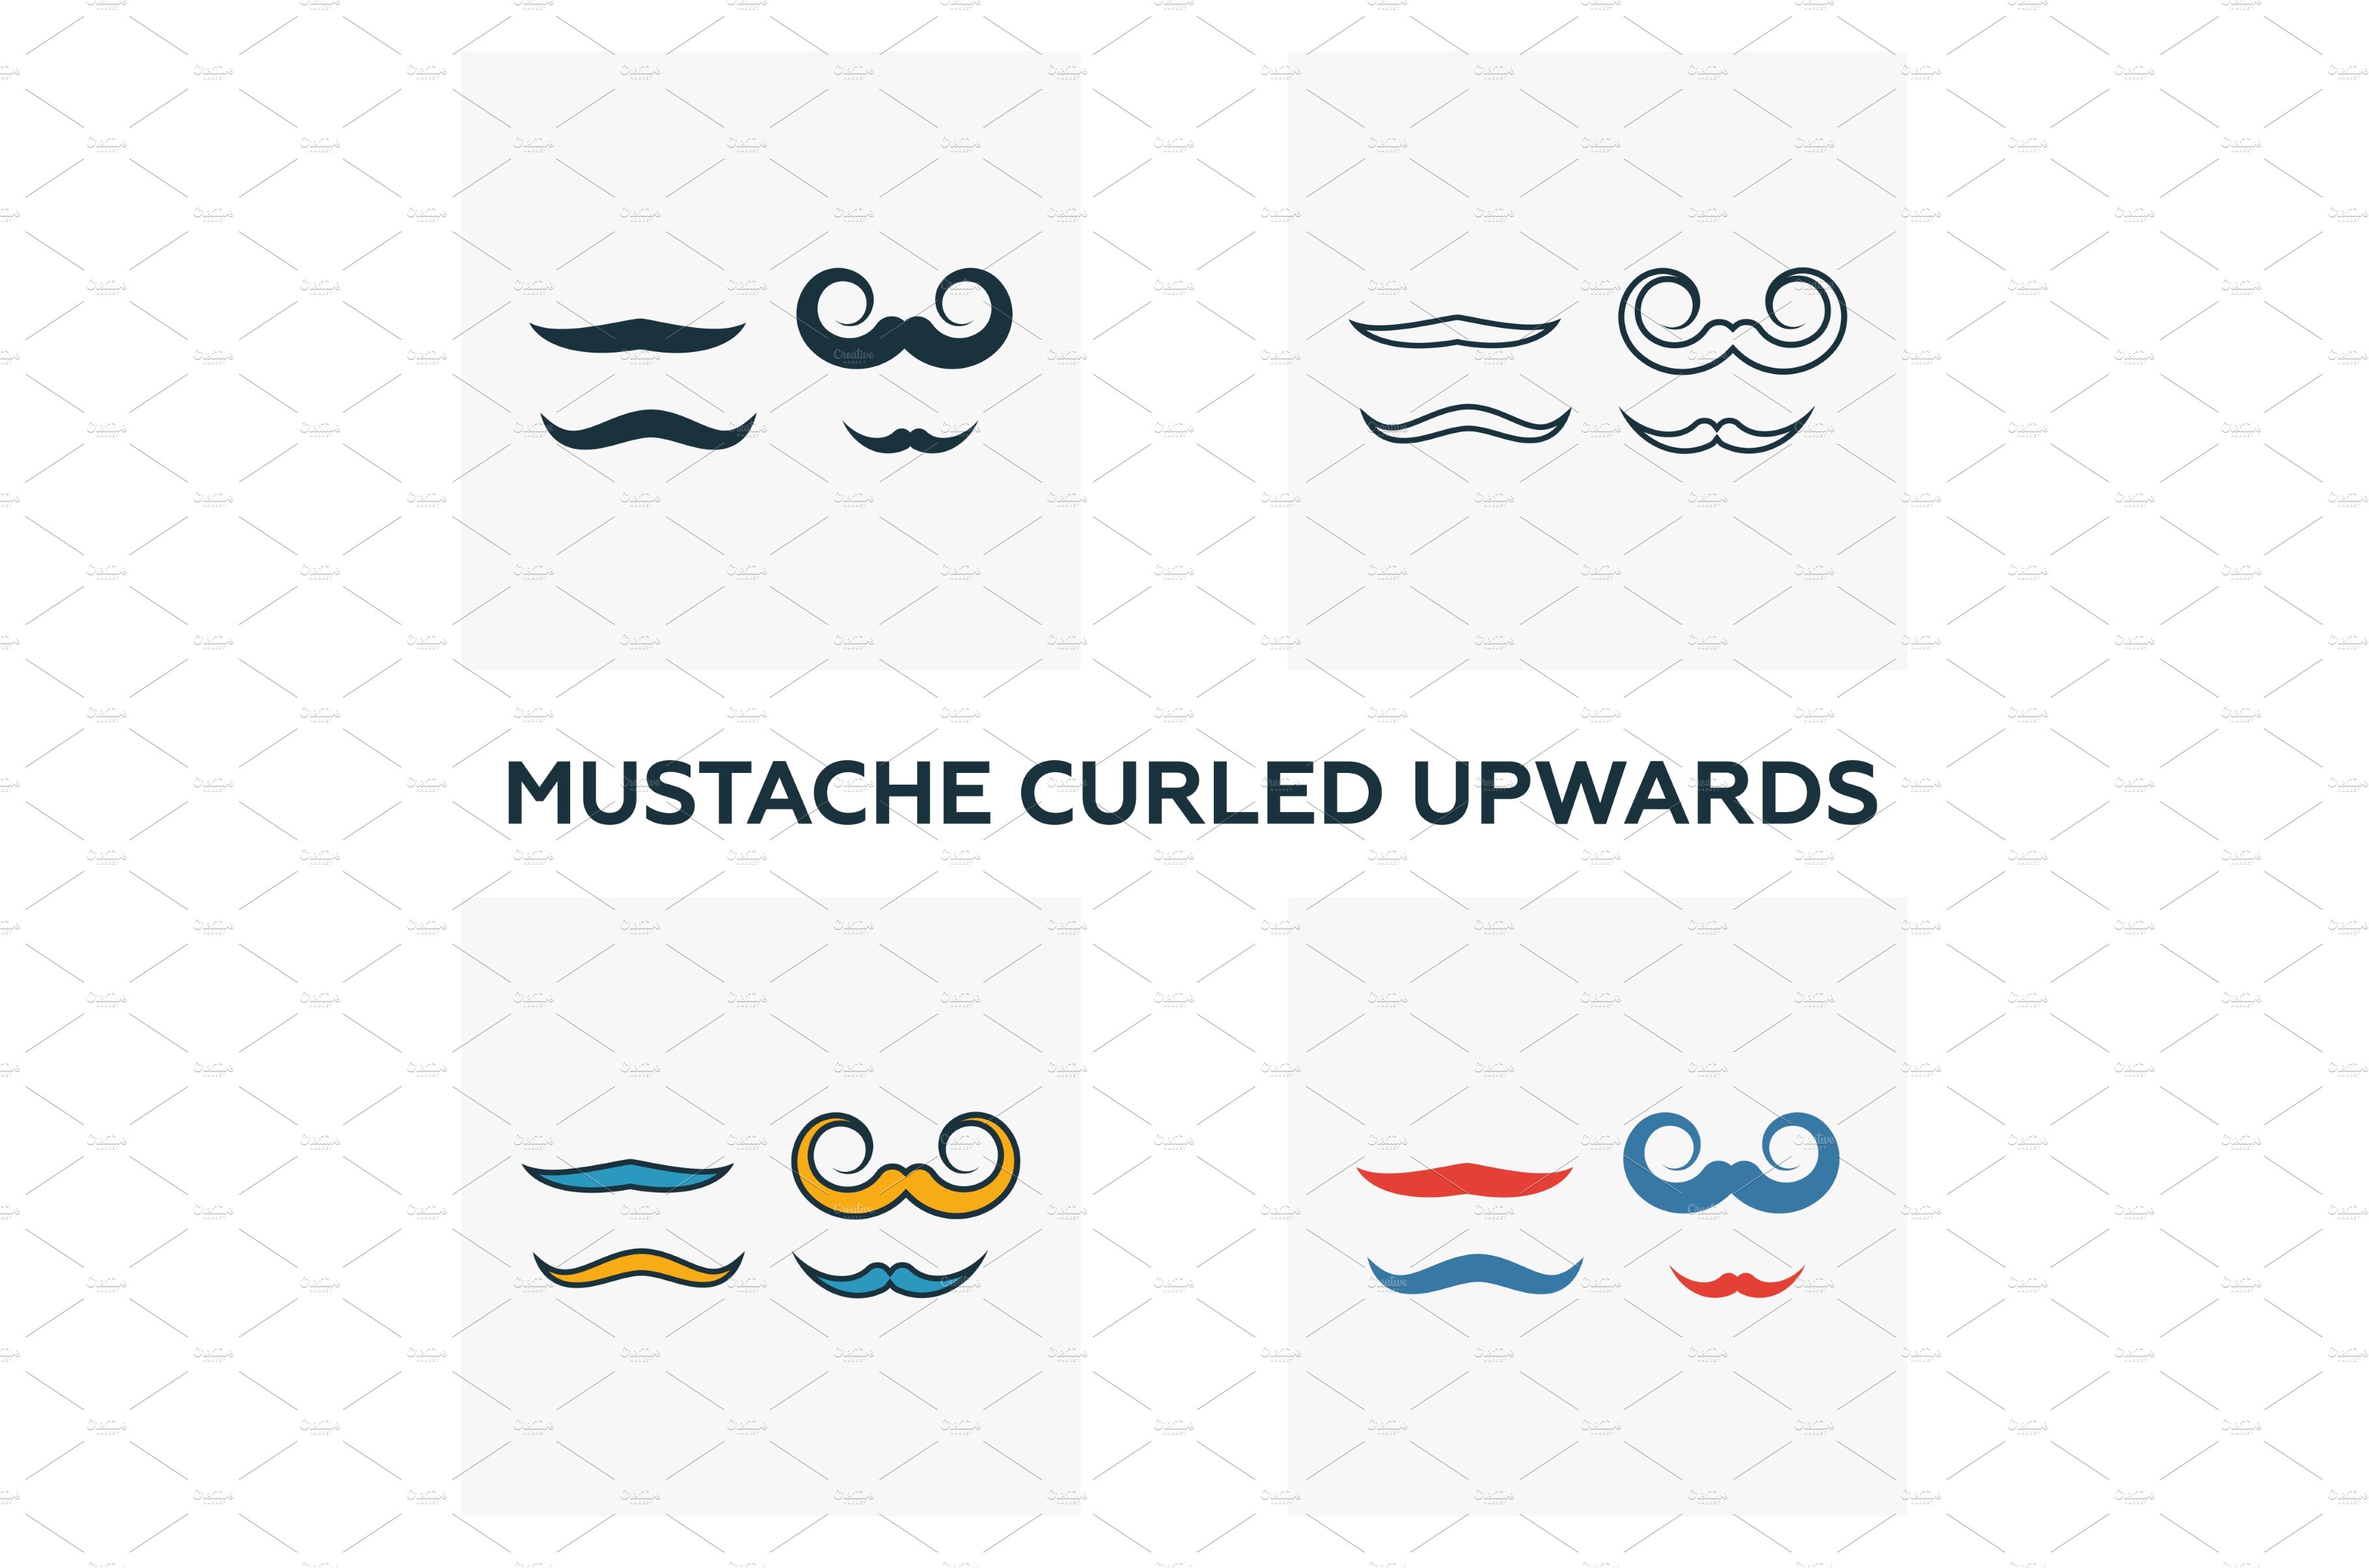 Mustache Curled Upwards icon set. cover image.